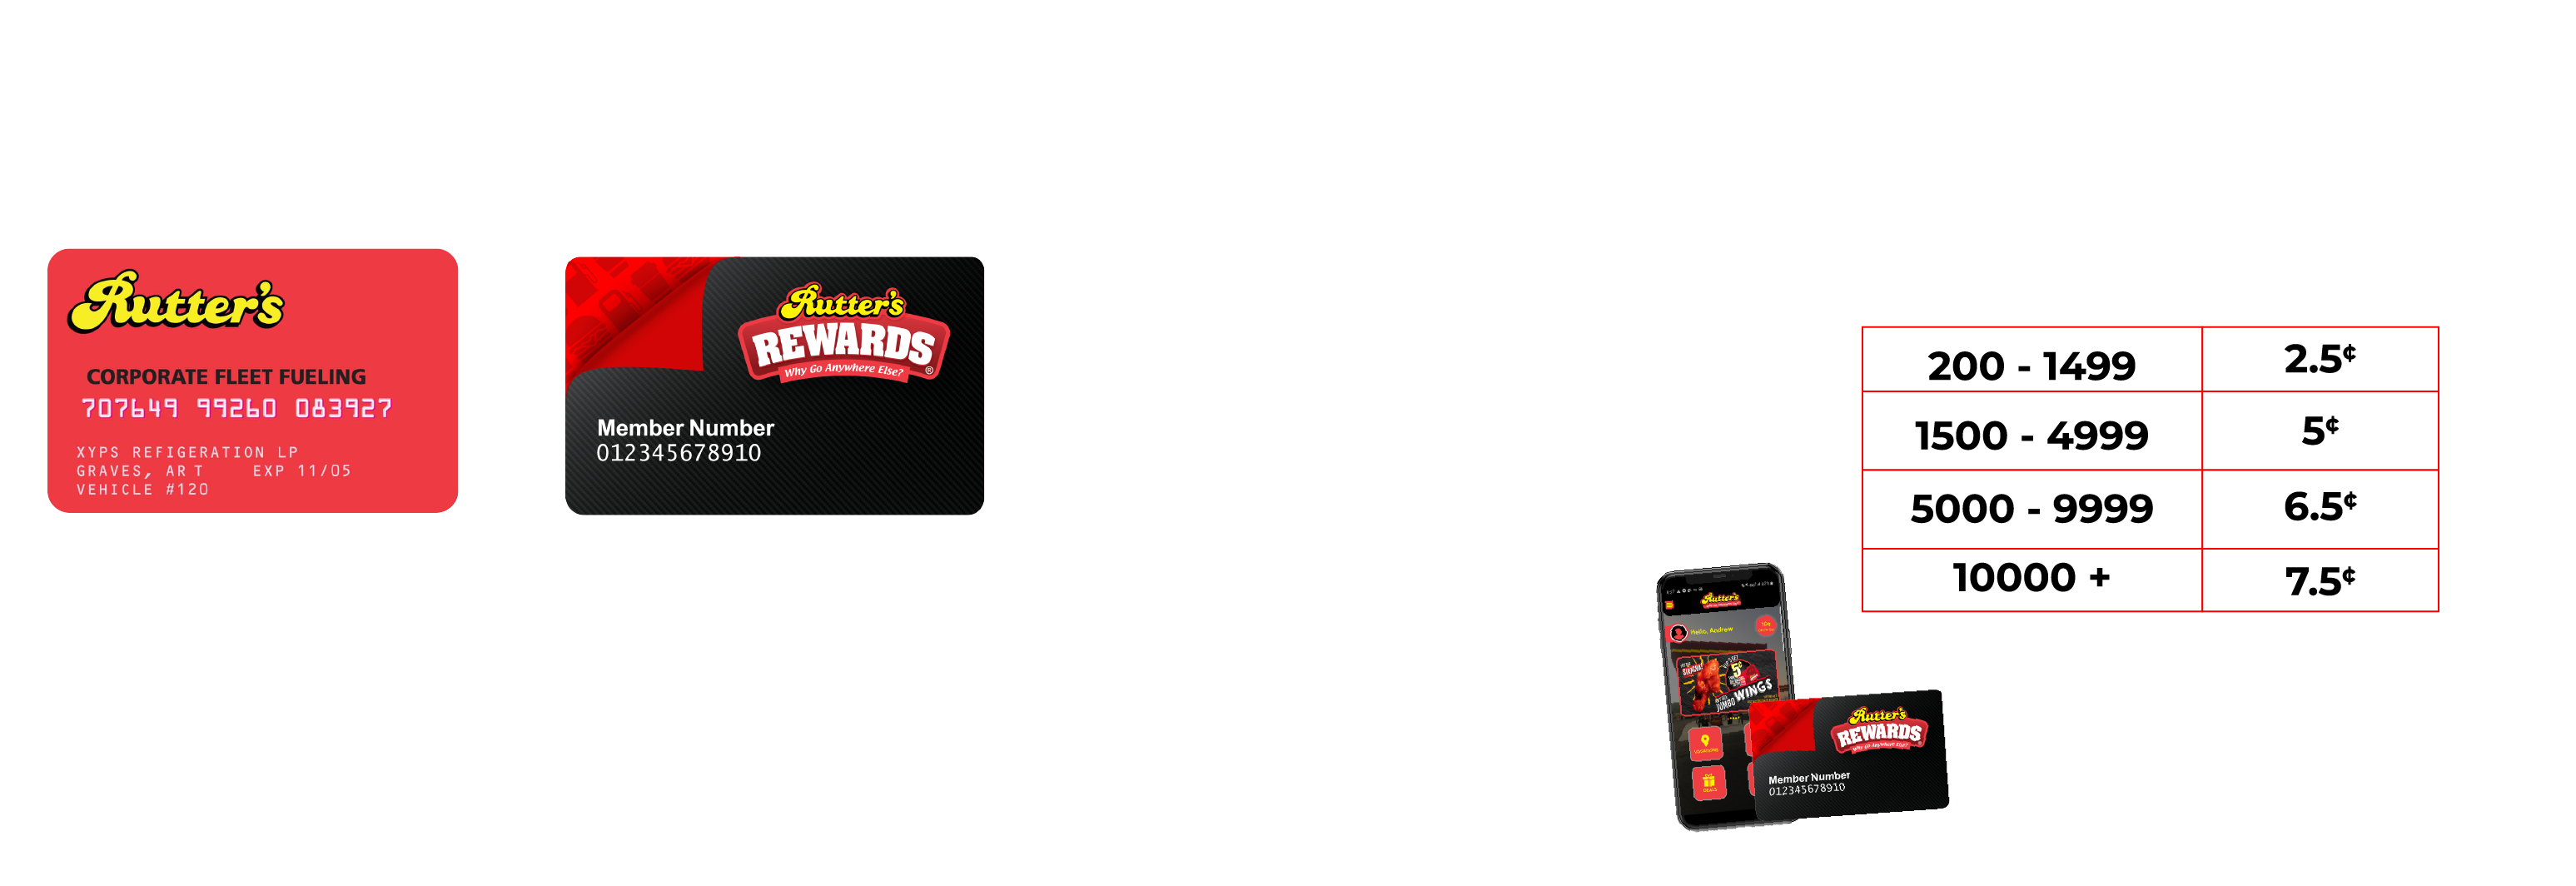 Save 13 cents with Rutter's fleet card!